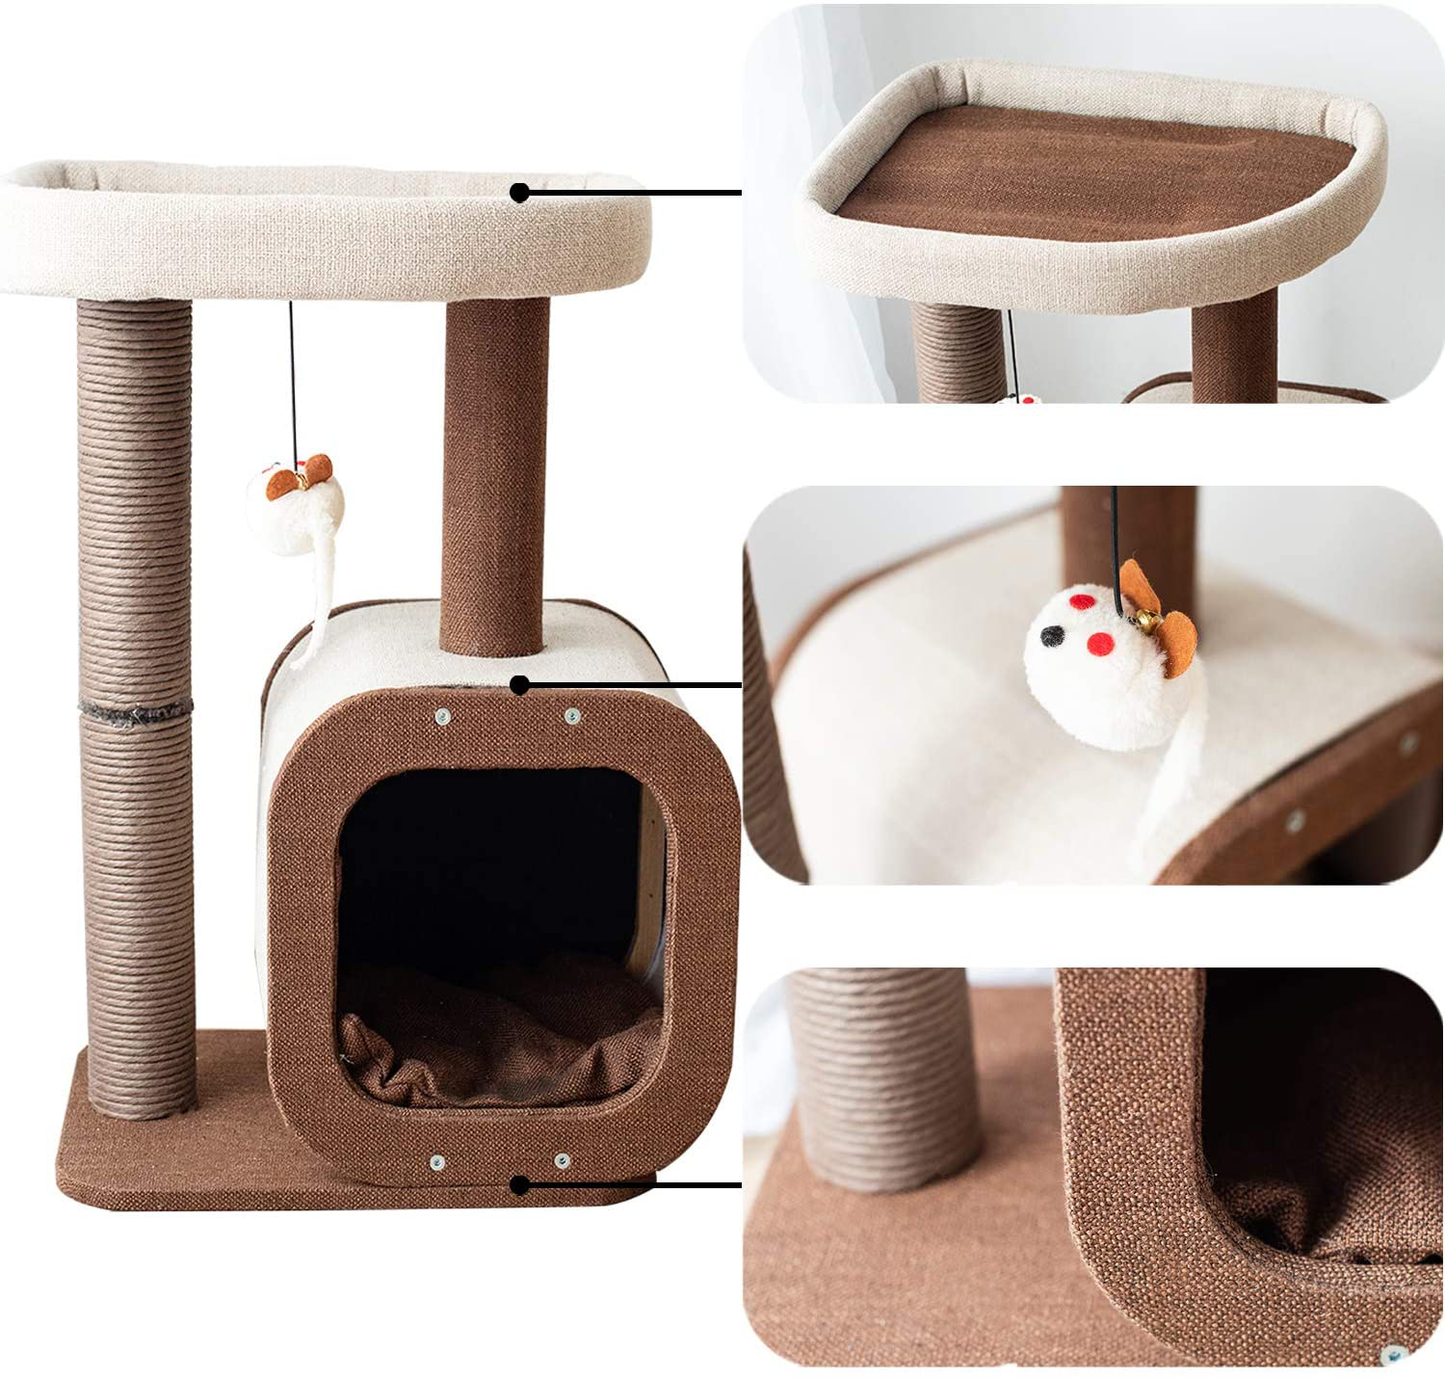 Catry Kitten Cat Tree Condo with Paper Rope Covered Scratching Post Activity Center for Climbing Relaxing and Playing Natural Jute Fiber Pet Stand